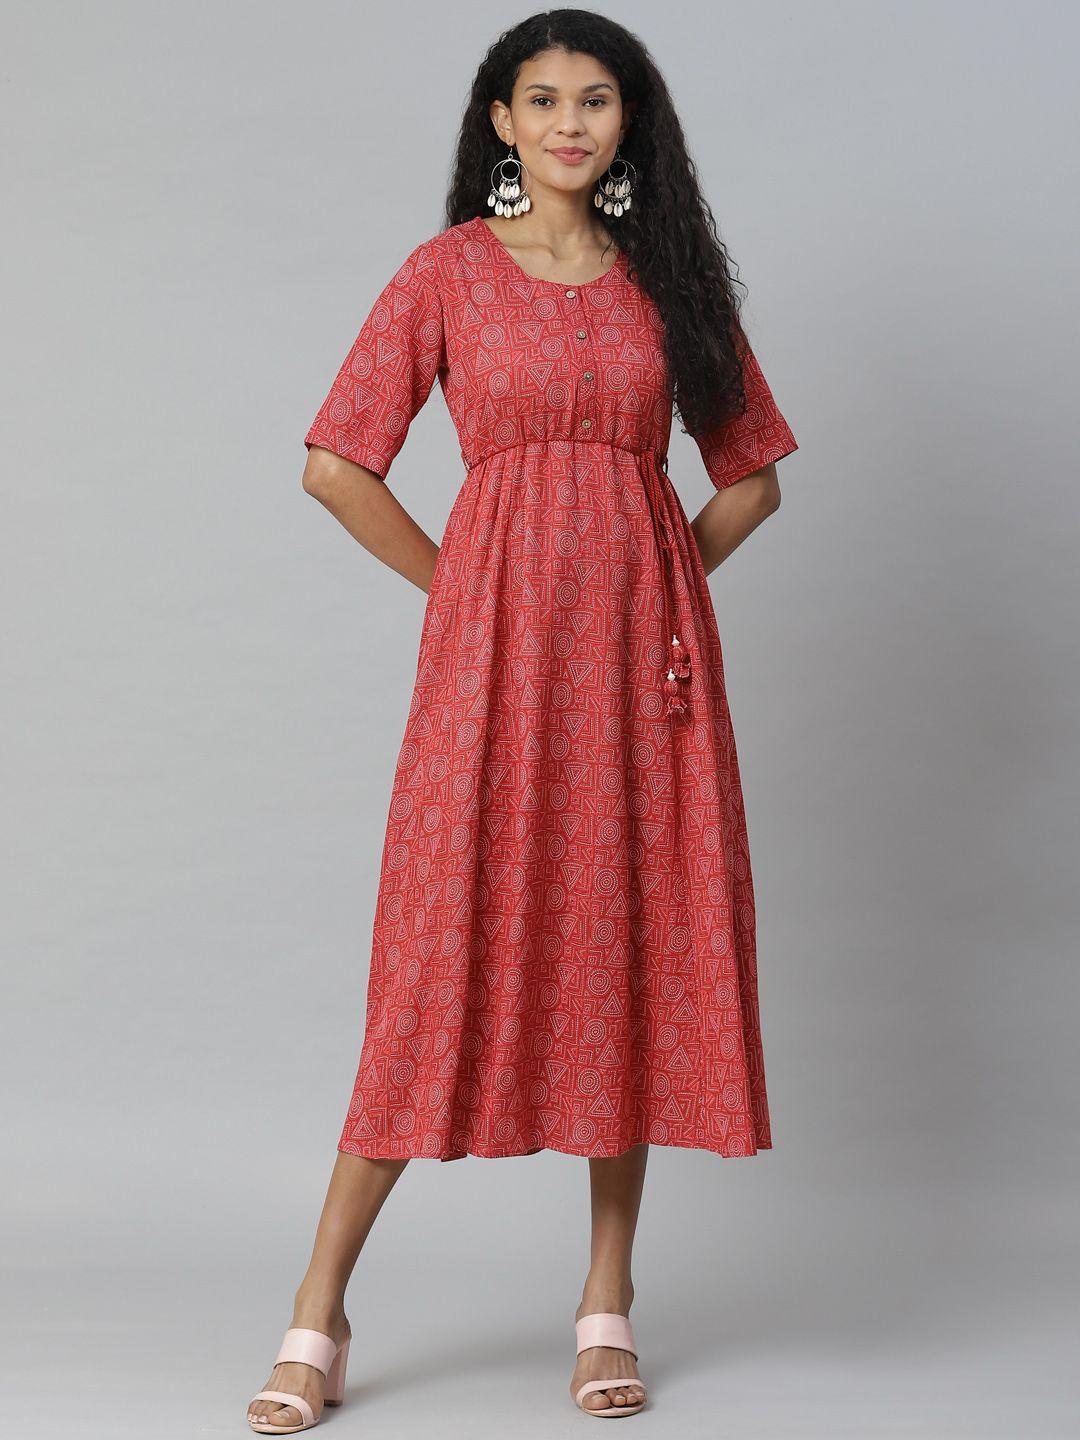 rangriti women red printed a-line with belt